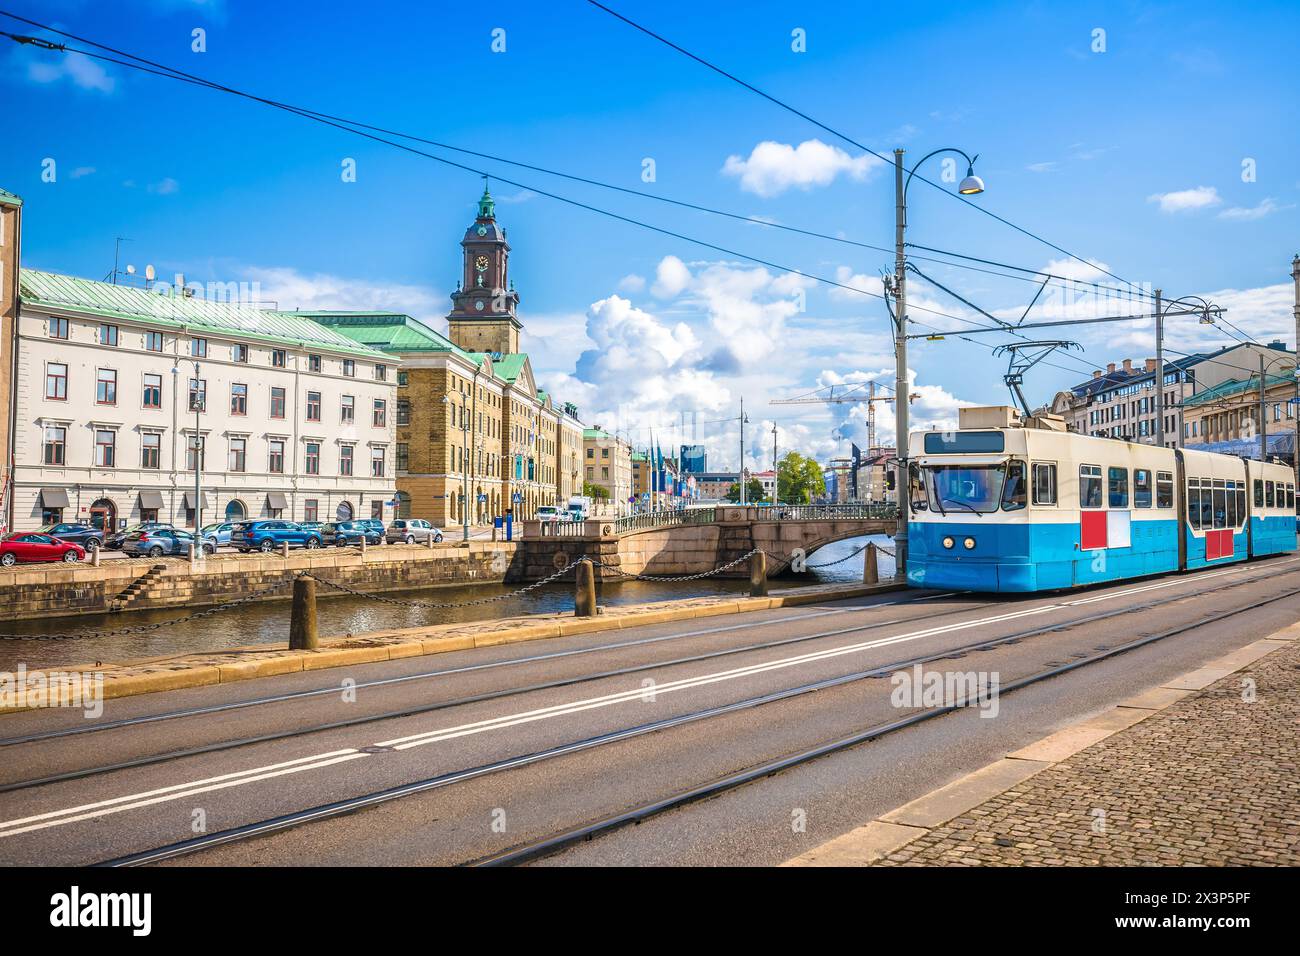 City of Gothenburg architecture and tram view, Vastra Gotaland County of Sweden Stock Photo